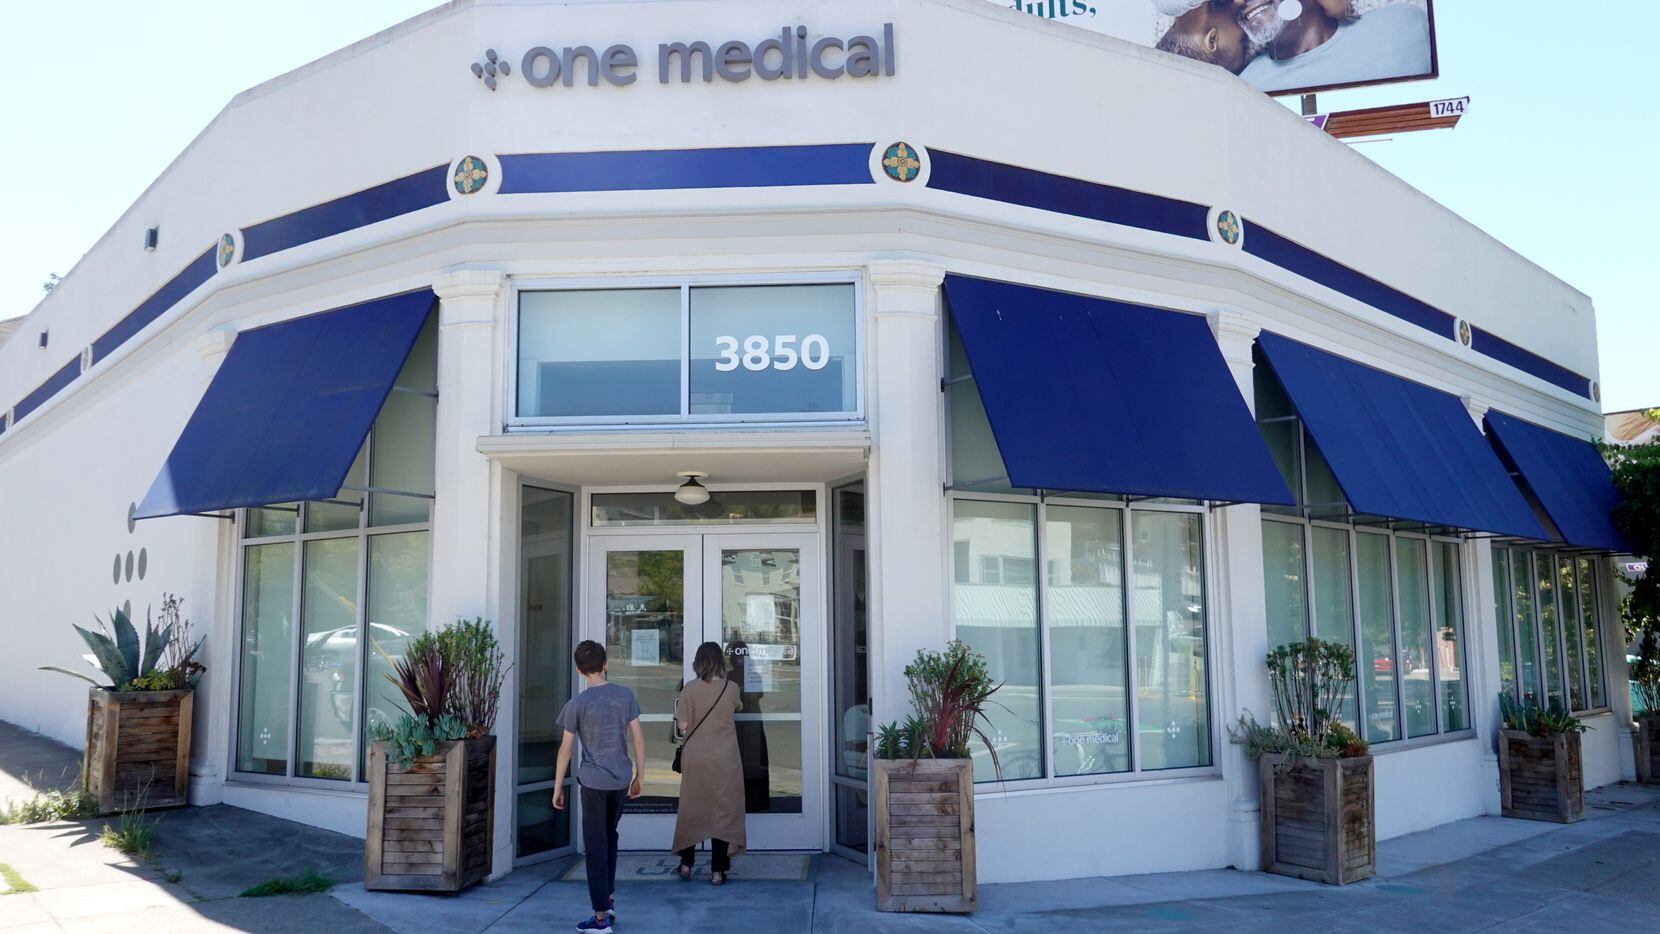 Membership-based One Medical is opening two Dallas clinics